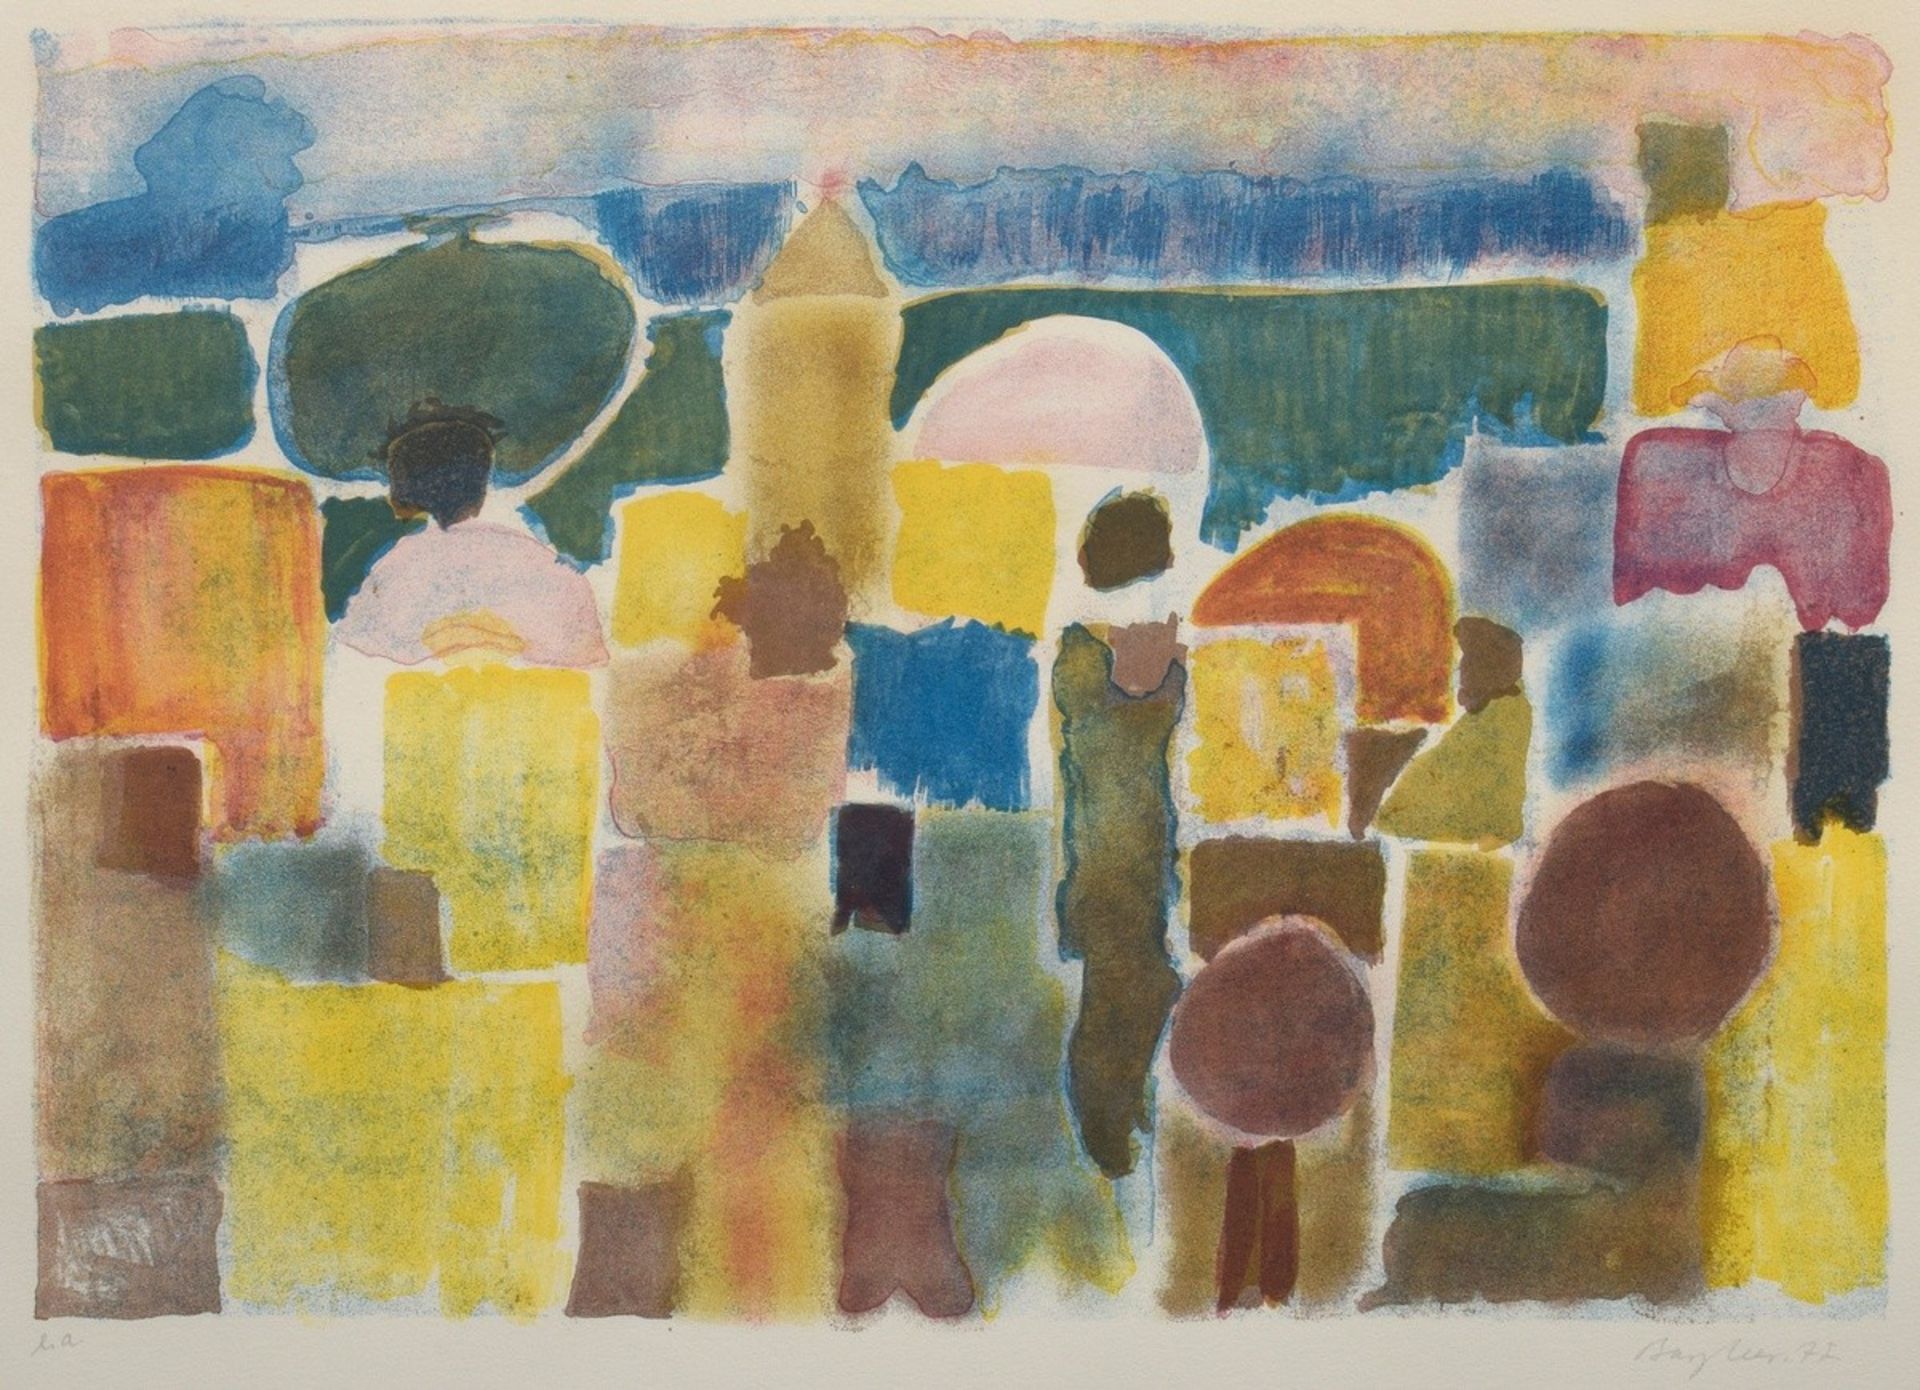 Bargheer, Eduard (1901-1979), untitled, 1977, color lithograph